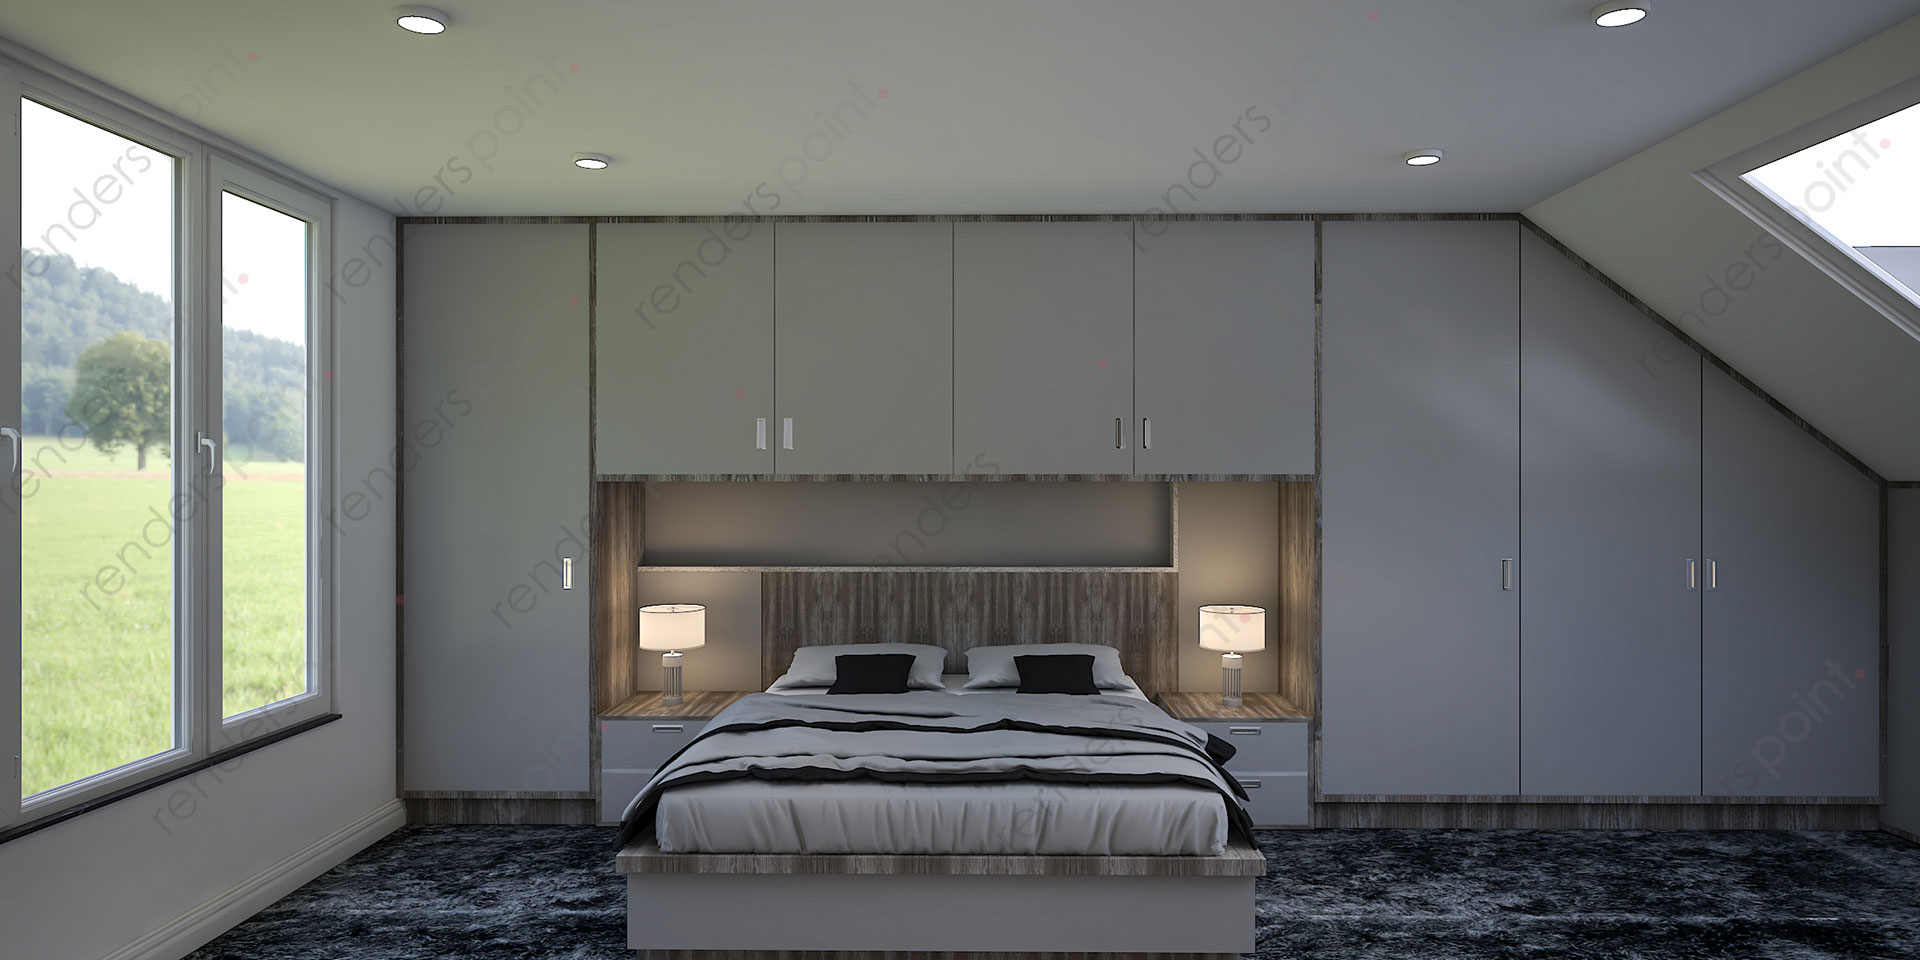 What are the Best 3D wardrobe Rendering Designs by Renders Point